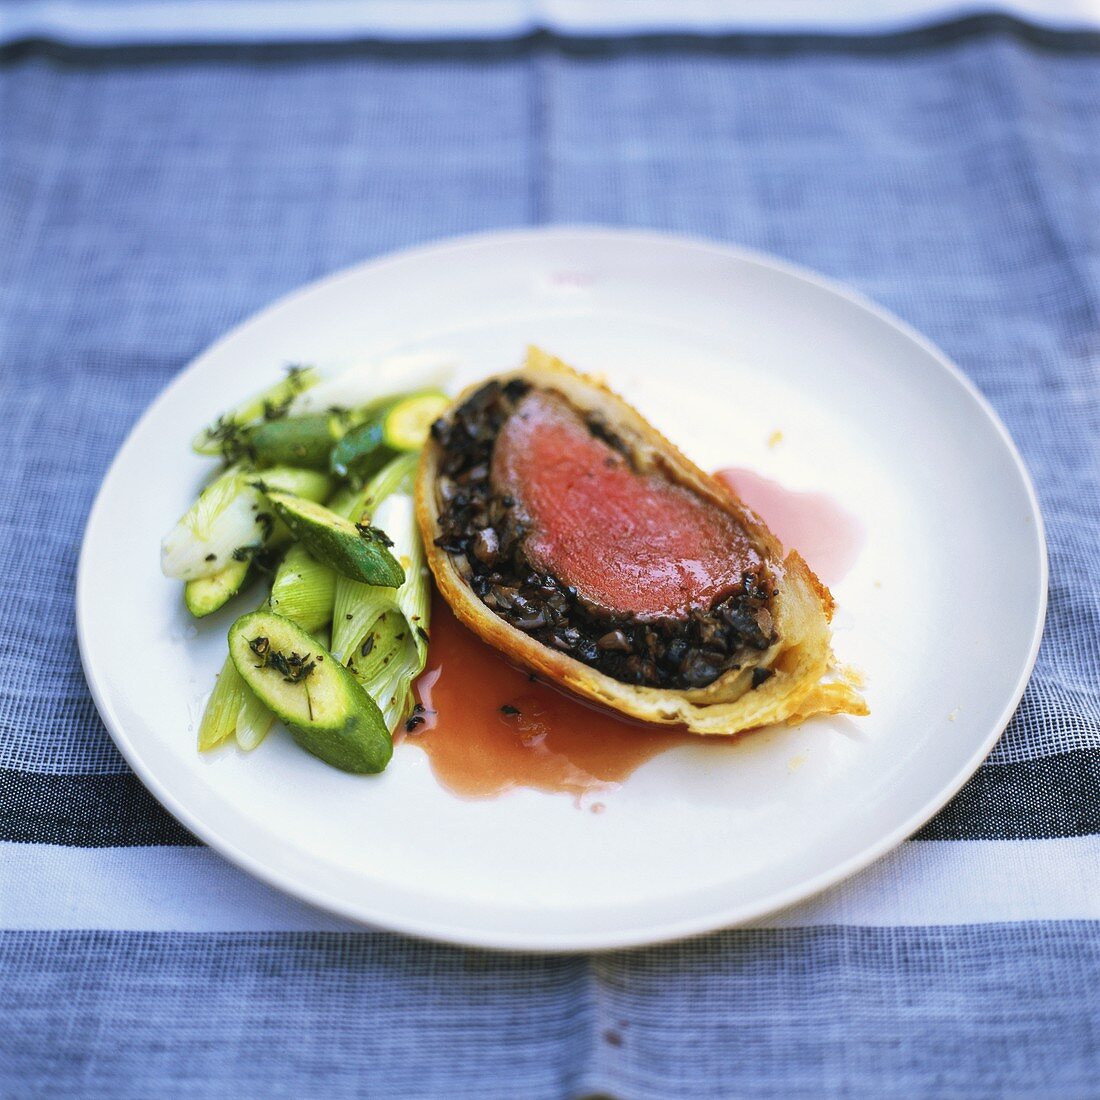 Venison fillet with mushroom stuffing in puff pastry